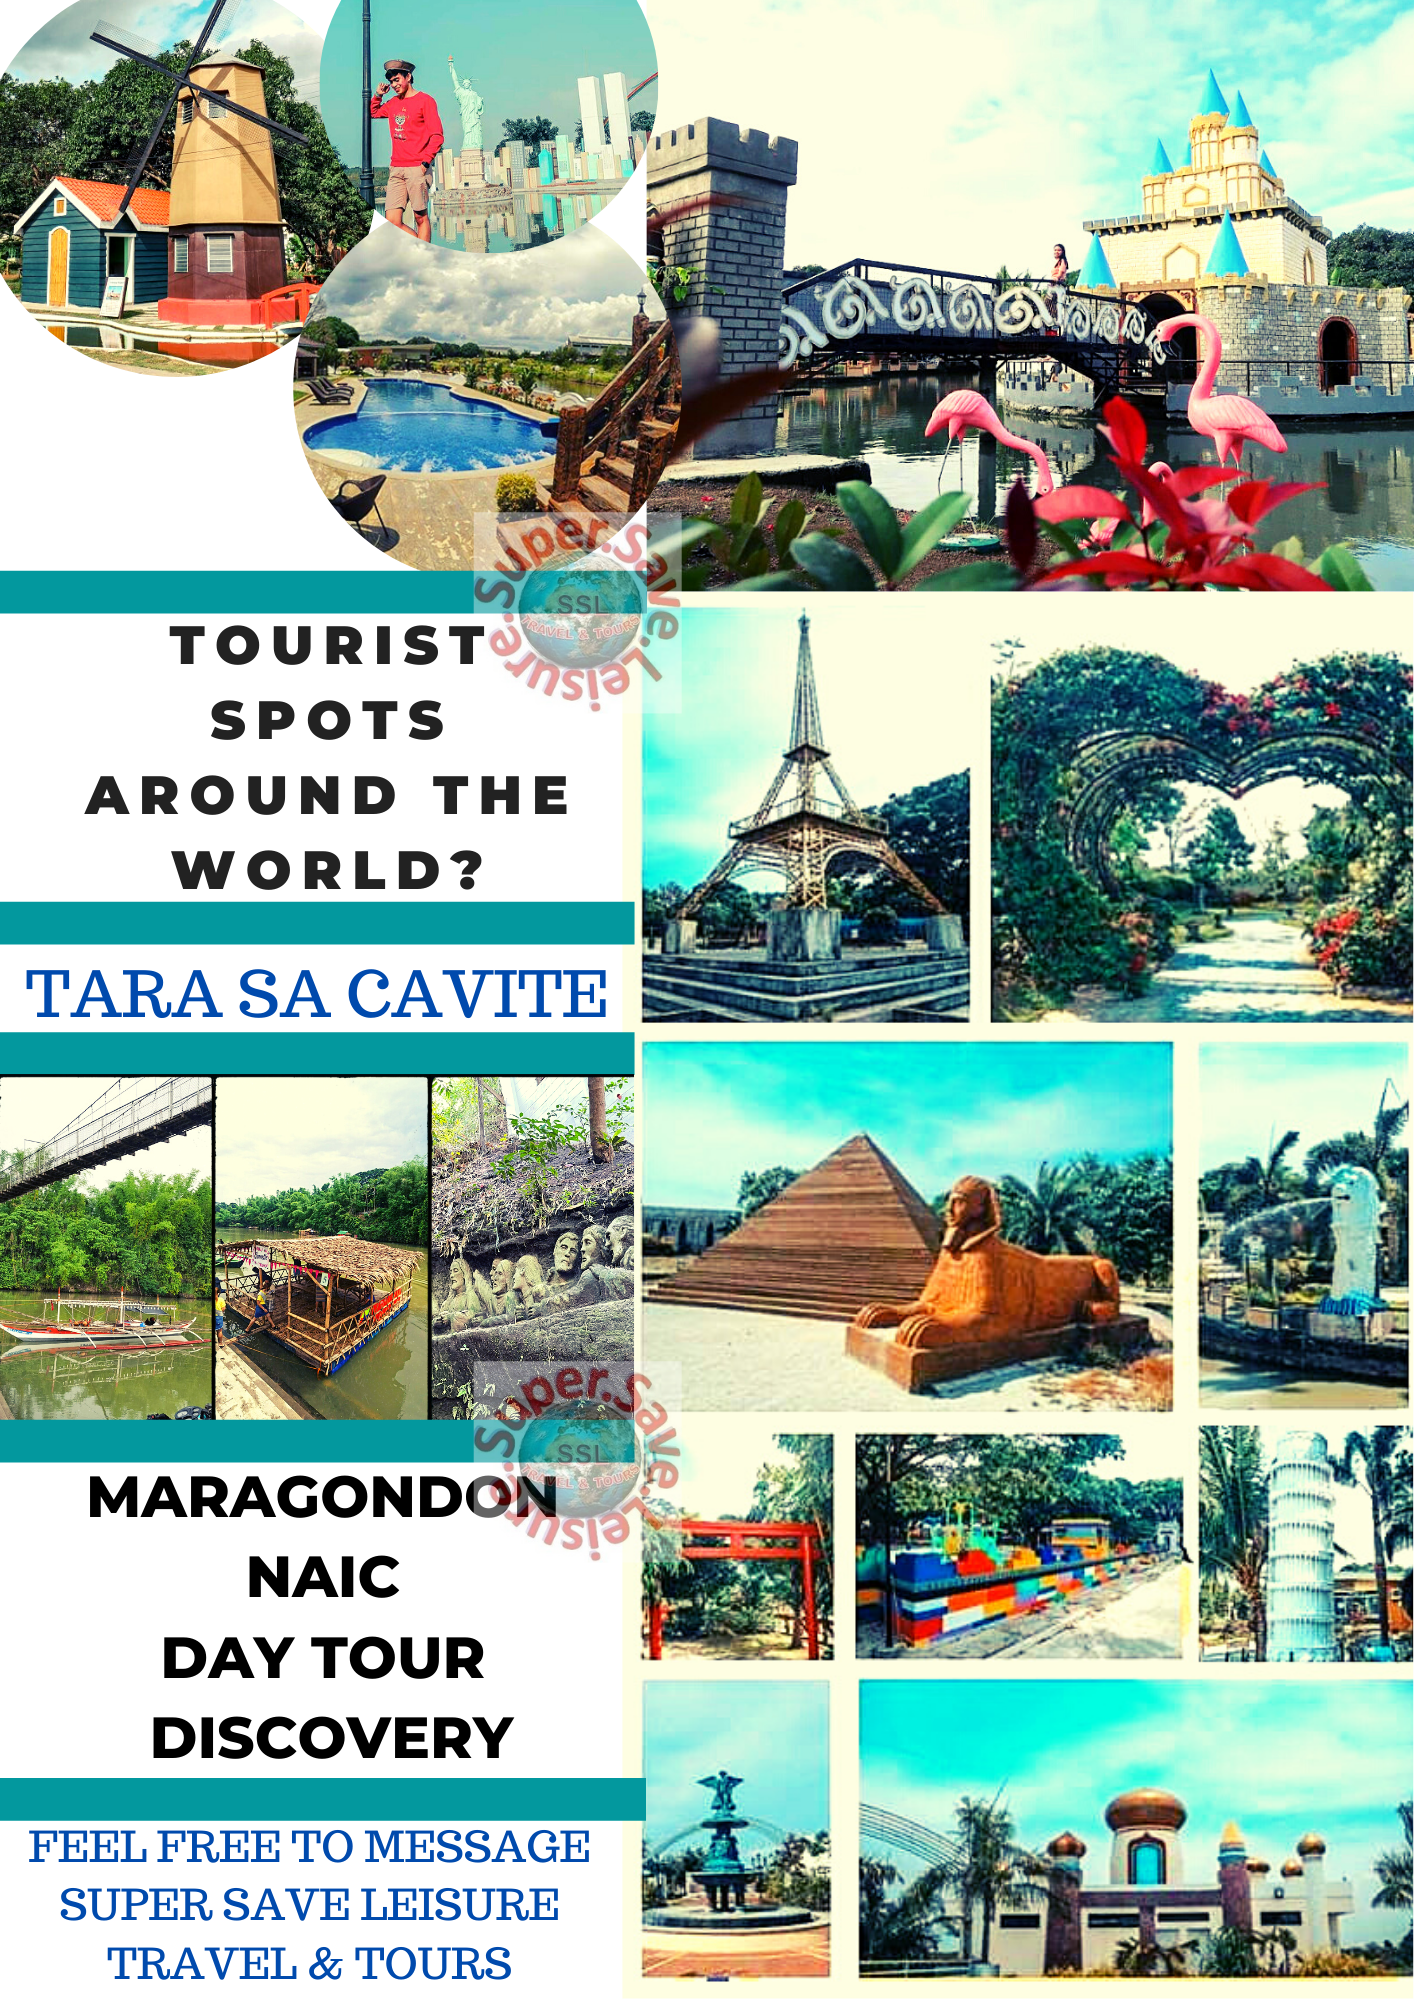 TARA SA CAVITE - Discover the natures beauty and stroll around the world in Cavite